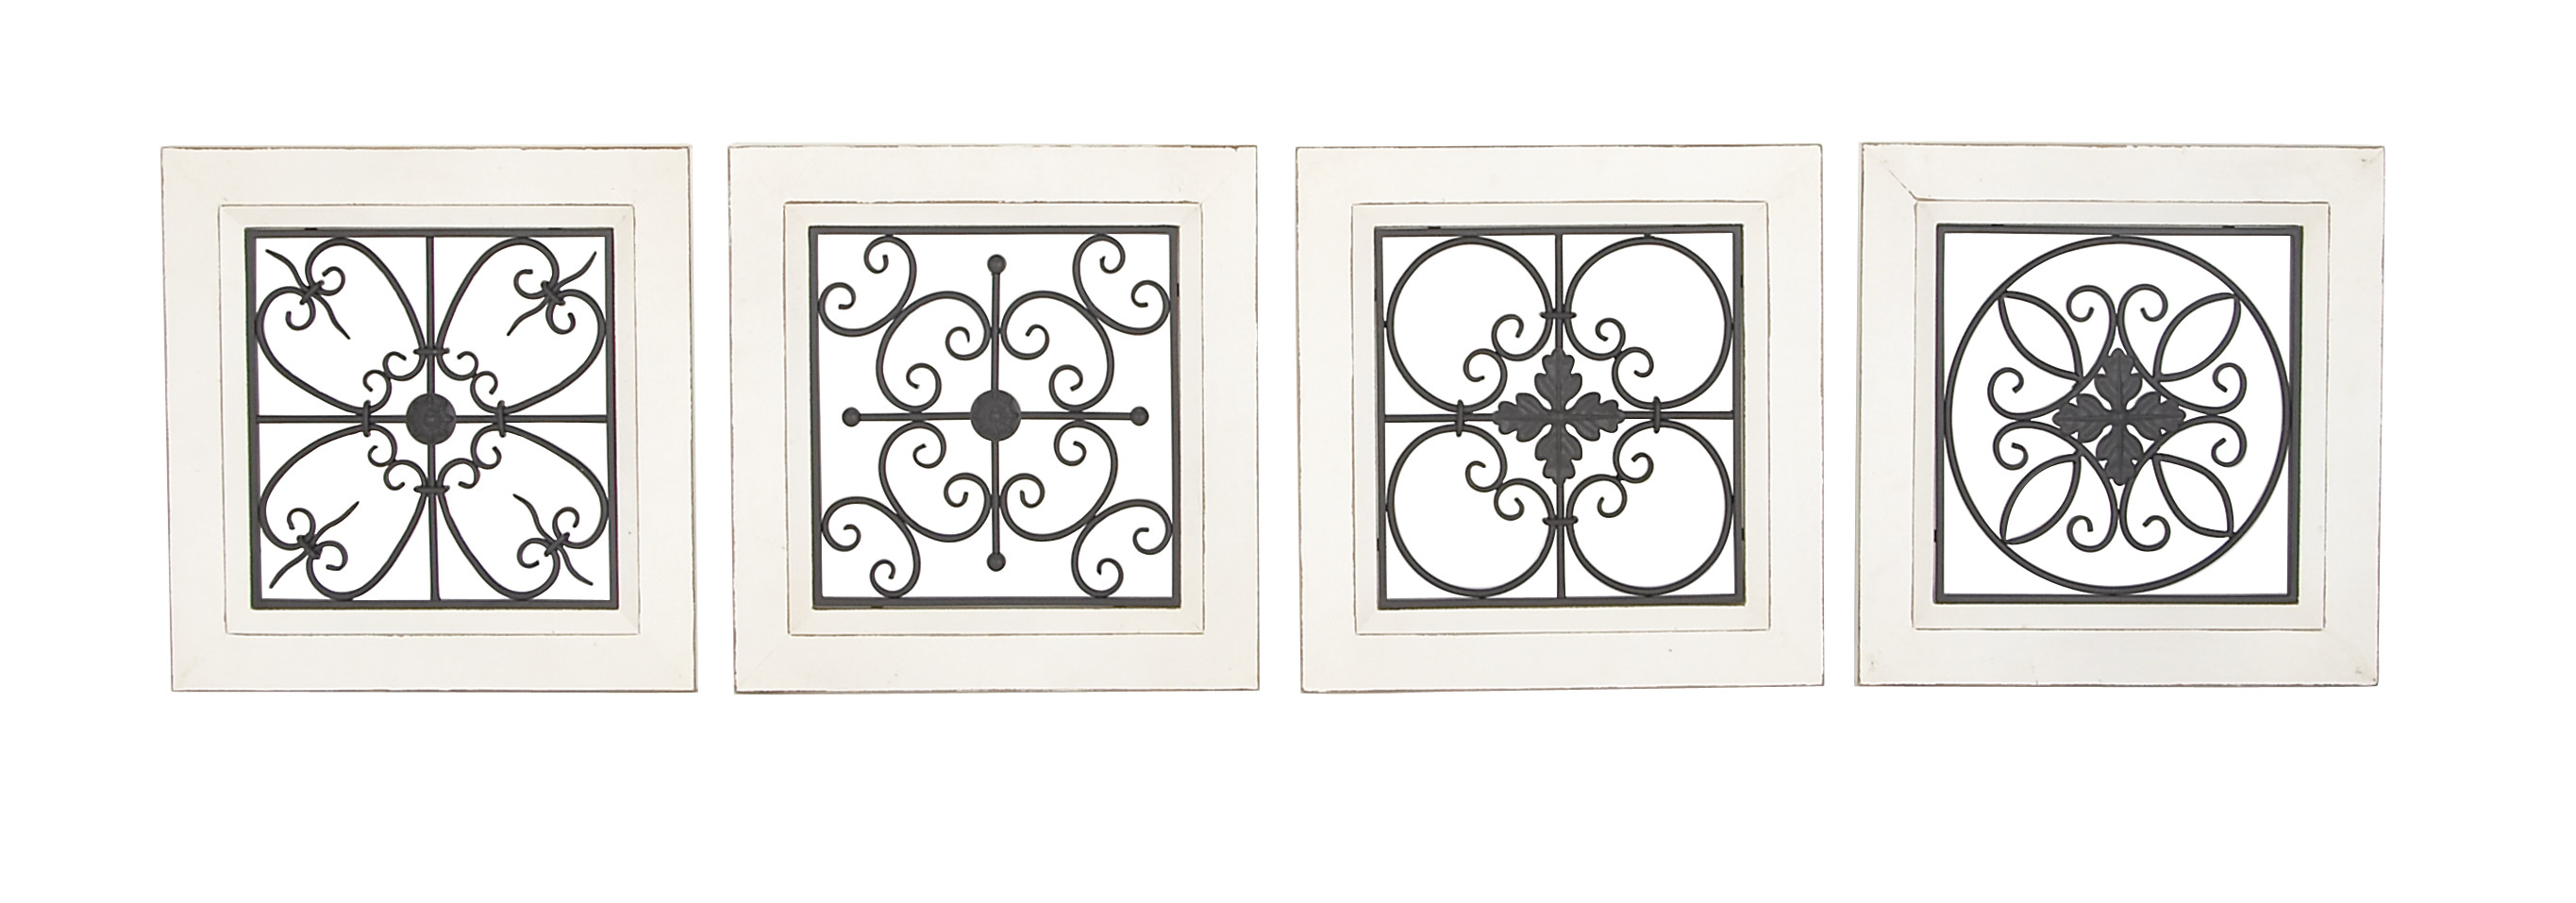 DecMode White Wood Scroll Wall Decor with Metal Relief (4 Count) - image 1 of 15